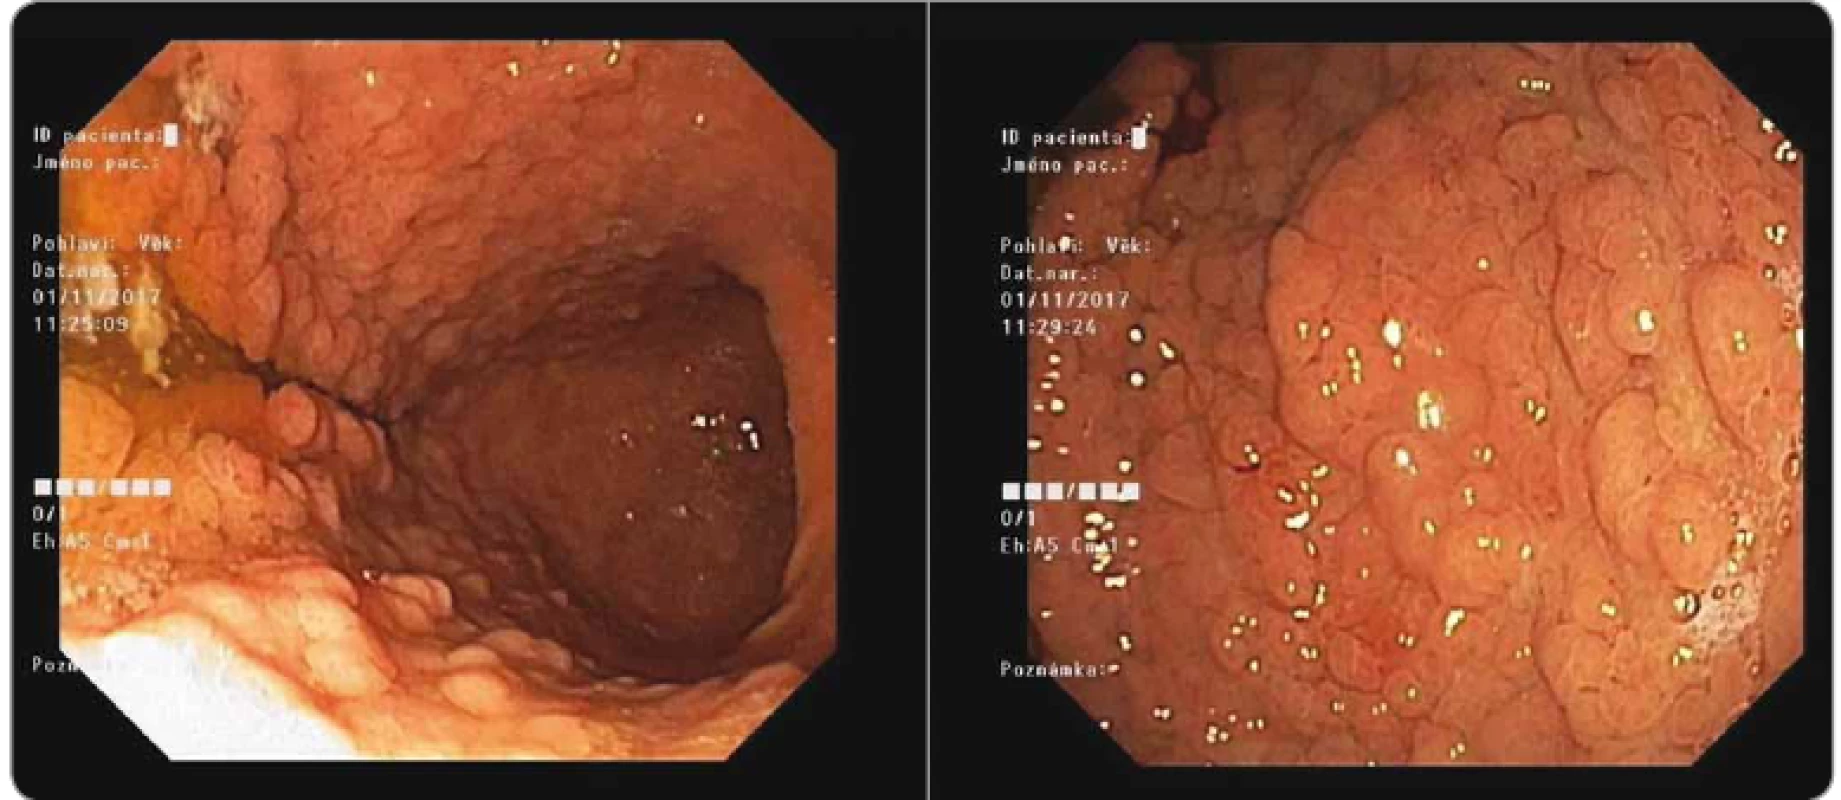 Gastroscopy with massive polyposis of stomach in gastric adenocarcinoma and proximal polyposis of the stomach patient
(Masaryk Memorial Cancer Institute).